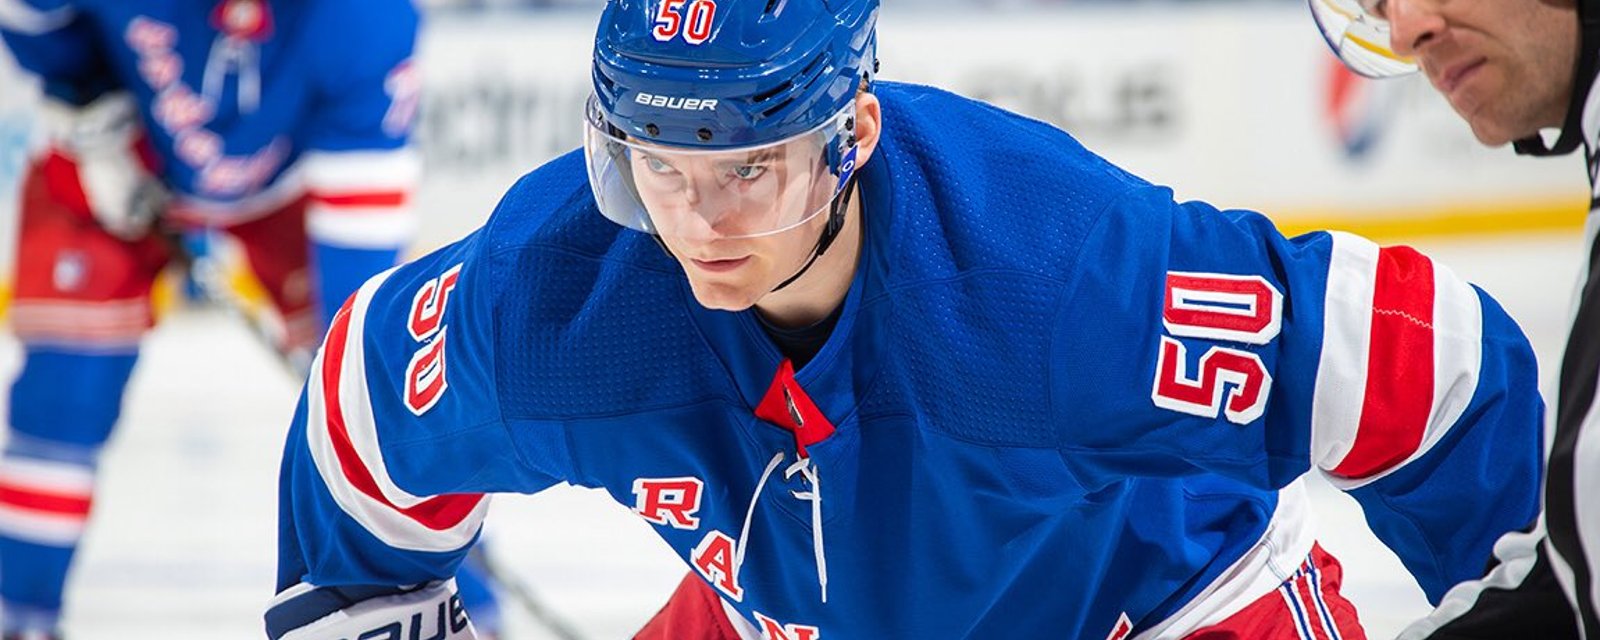 Lias Andersson, victim of bullying in New York?!